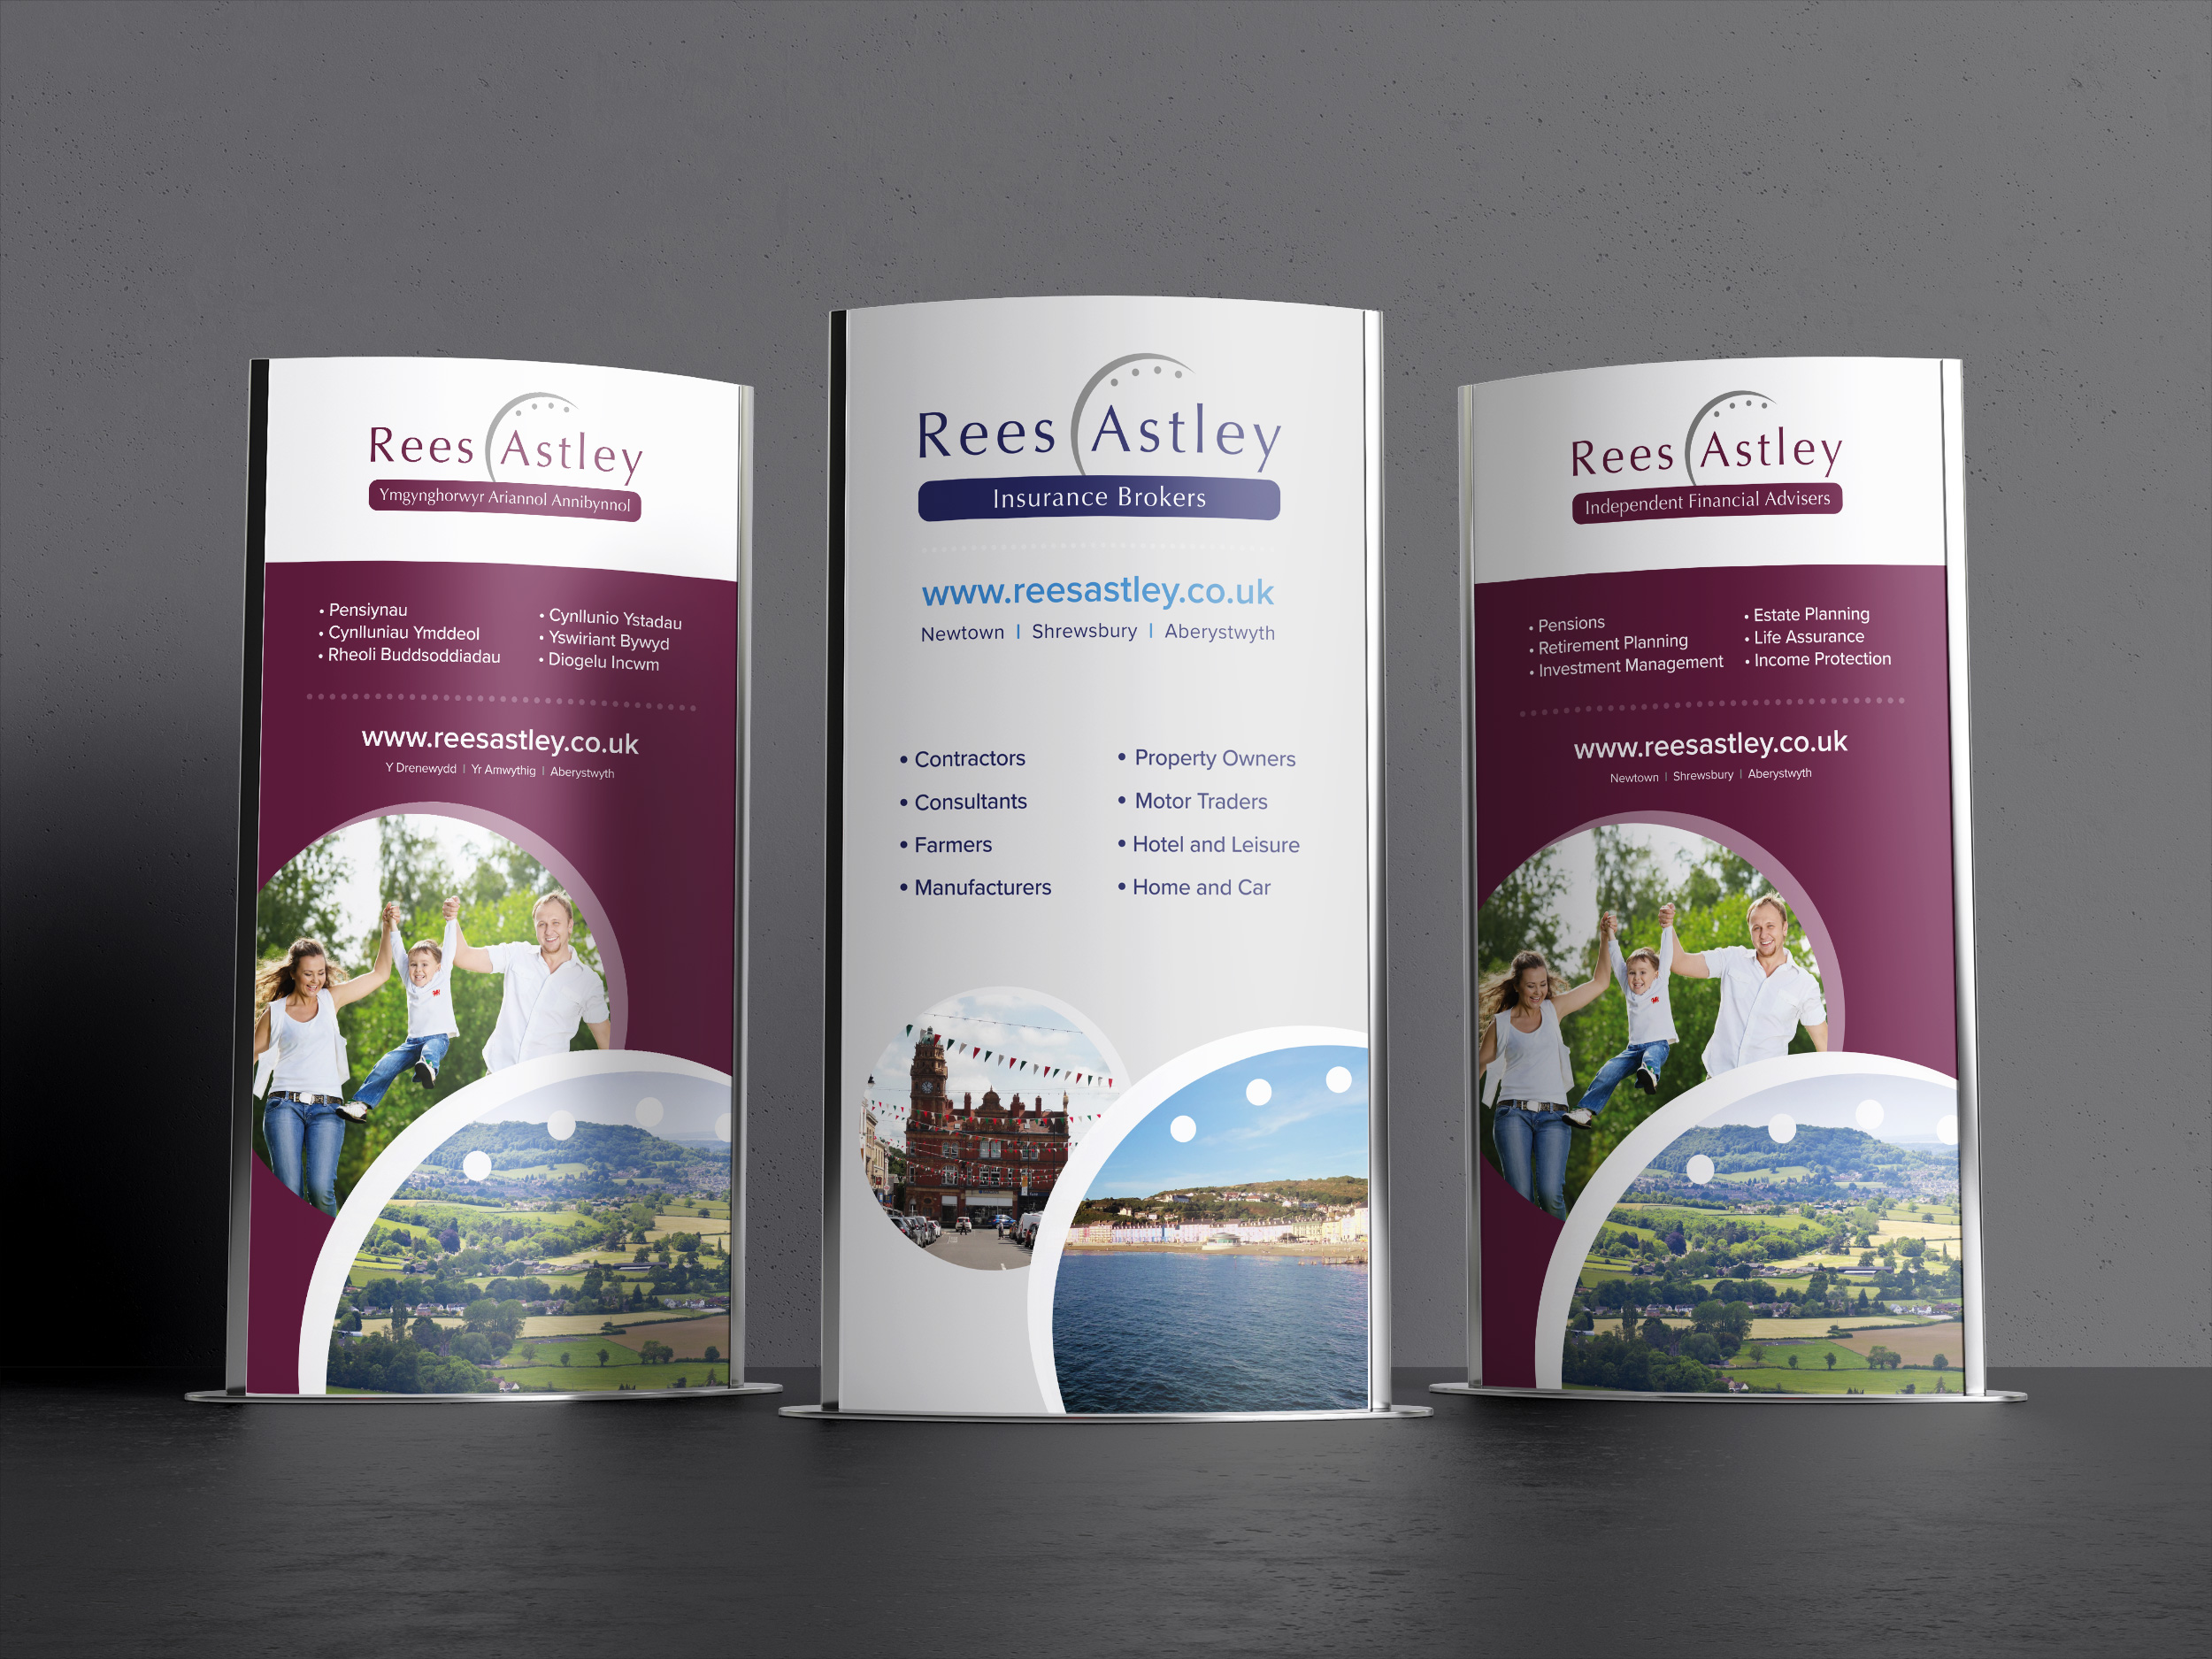 Rees Astley banners